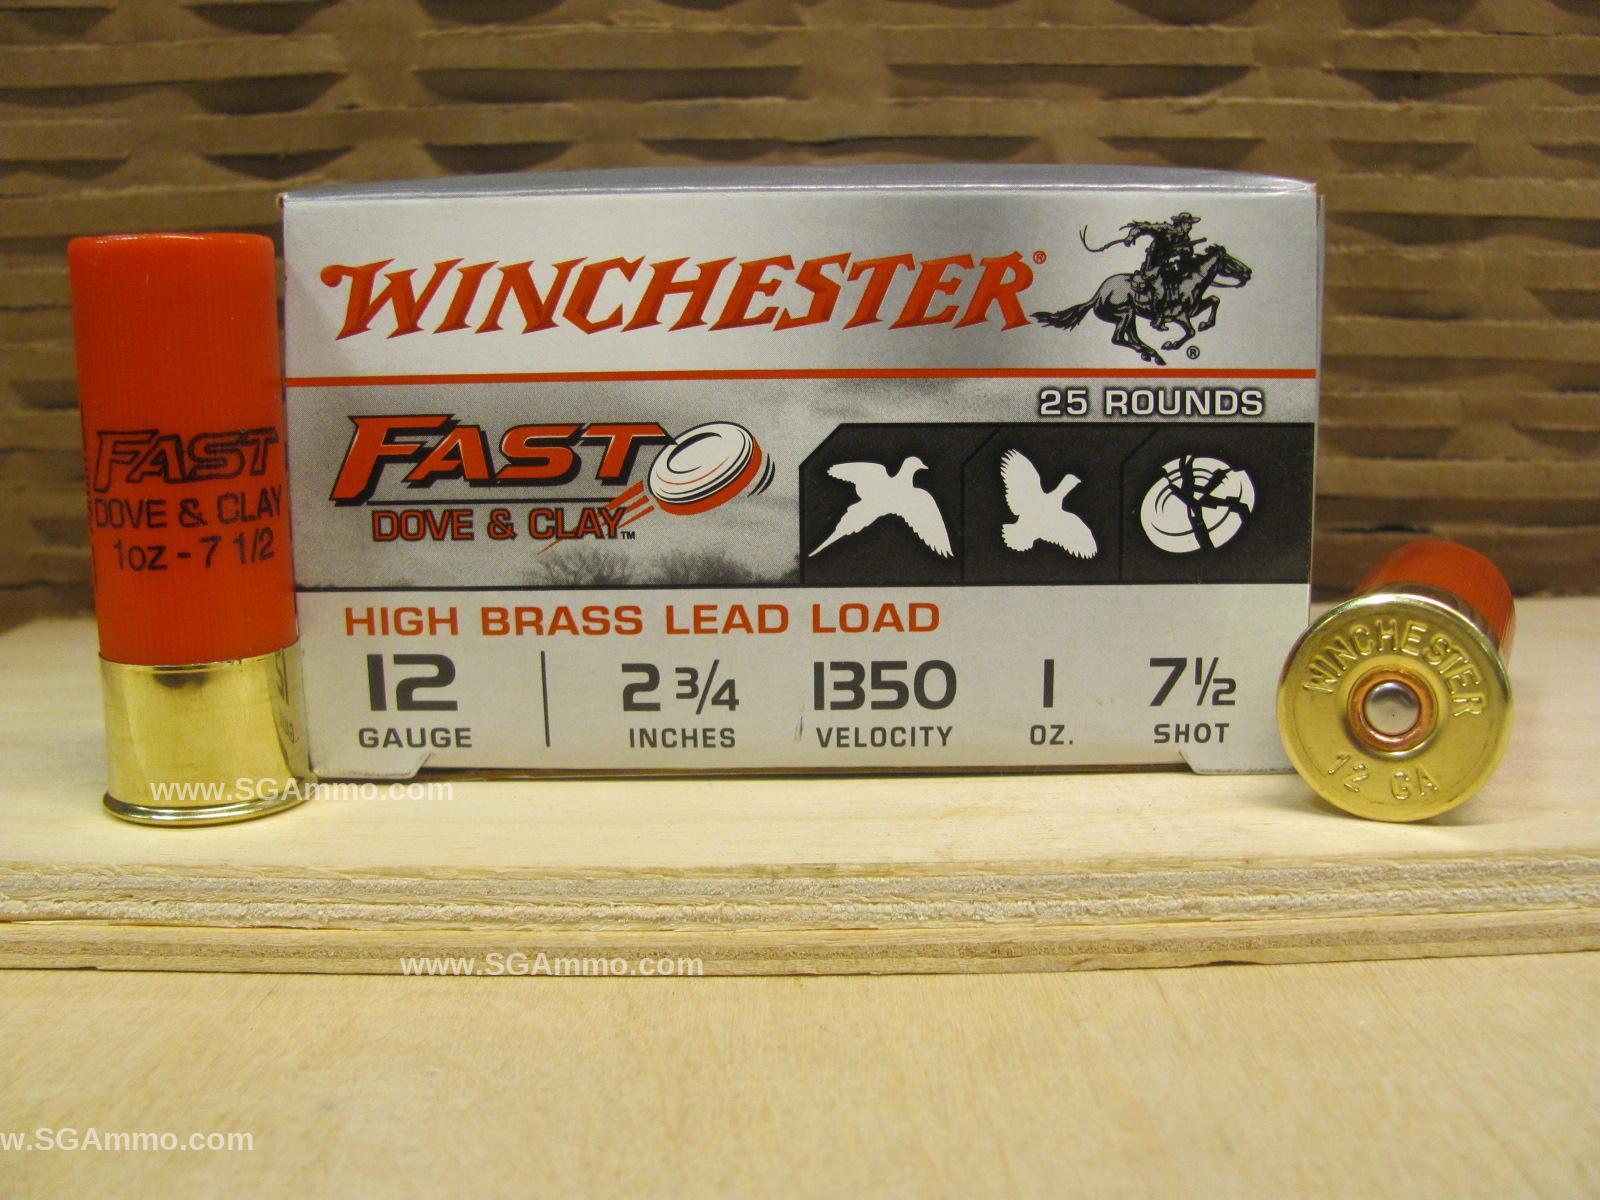 250 Round Case - 12 Gauge 2.75 Inch 1 Ounce 7.5 Shot Winchester High Brass  Lead Load Dove and Clay Ammo - WFD127B